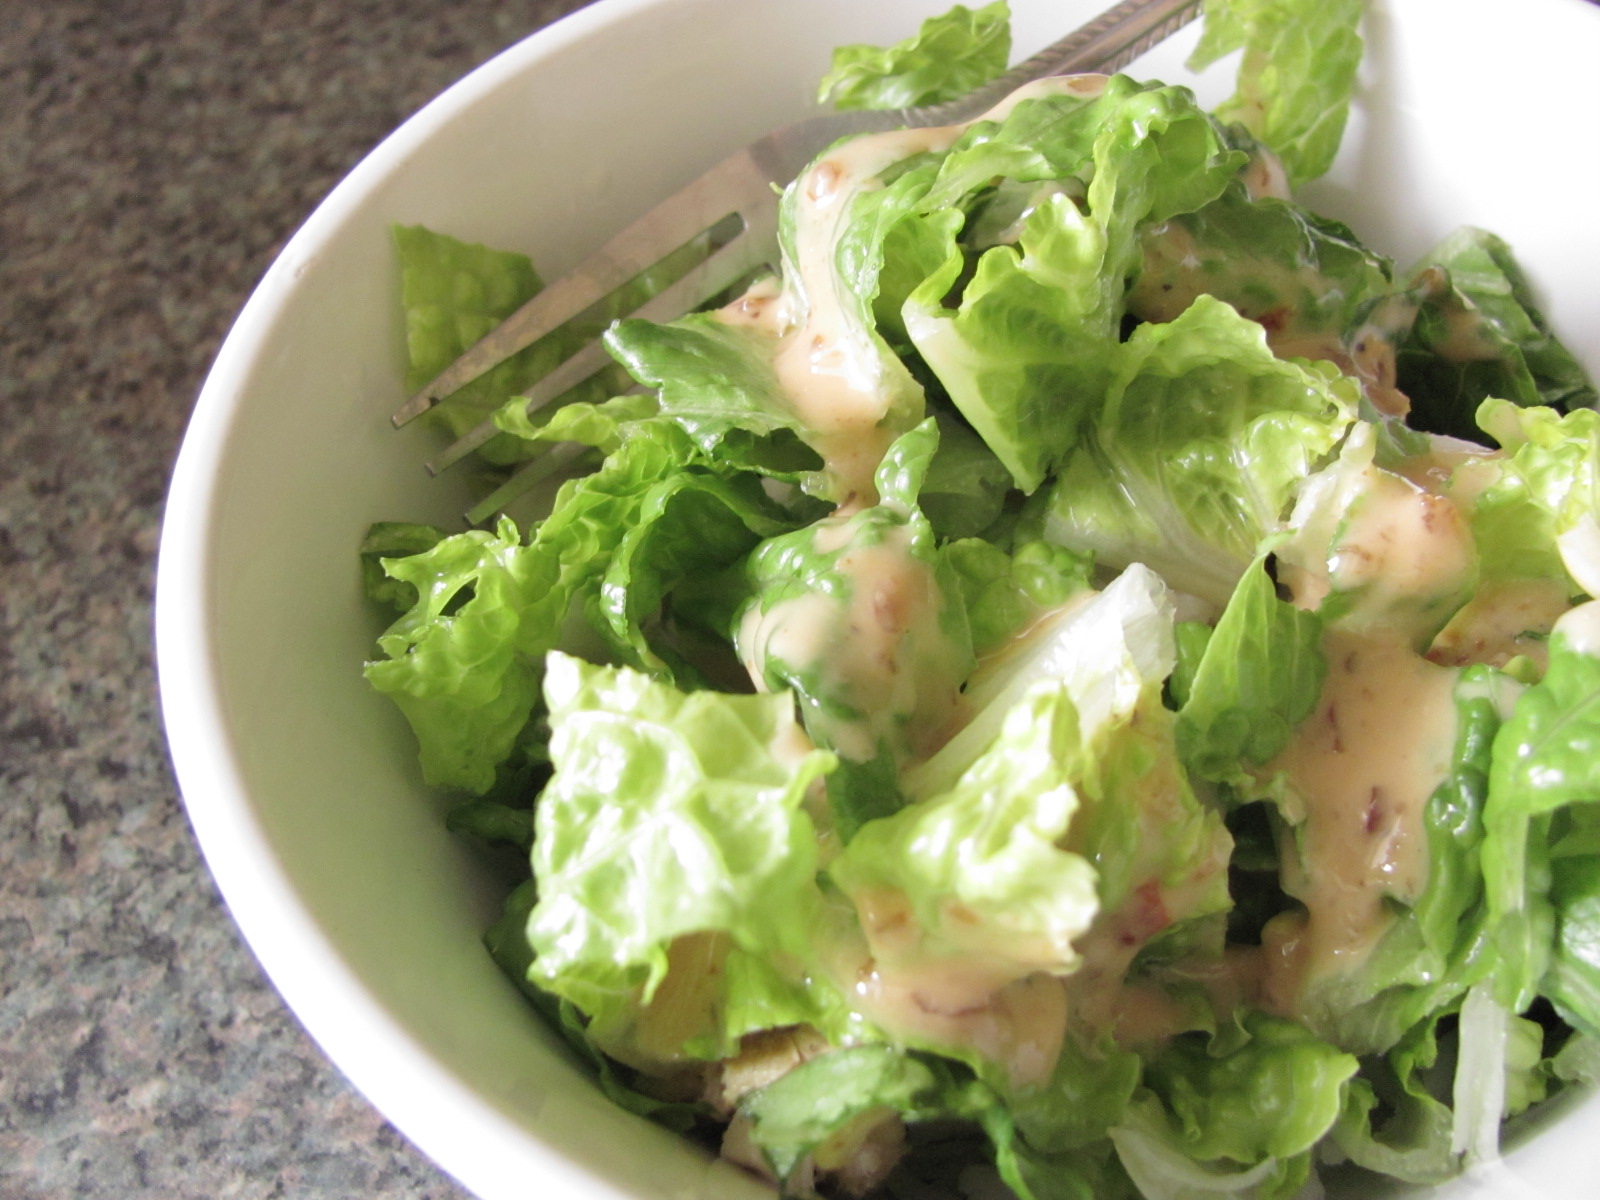 there is a salad with lettuce and dressing in the bowl